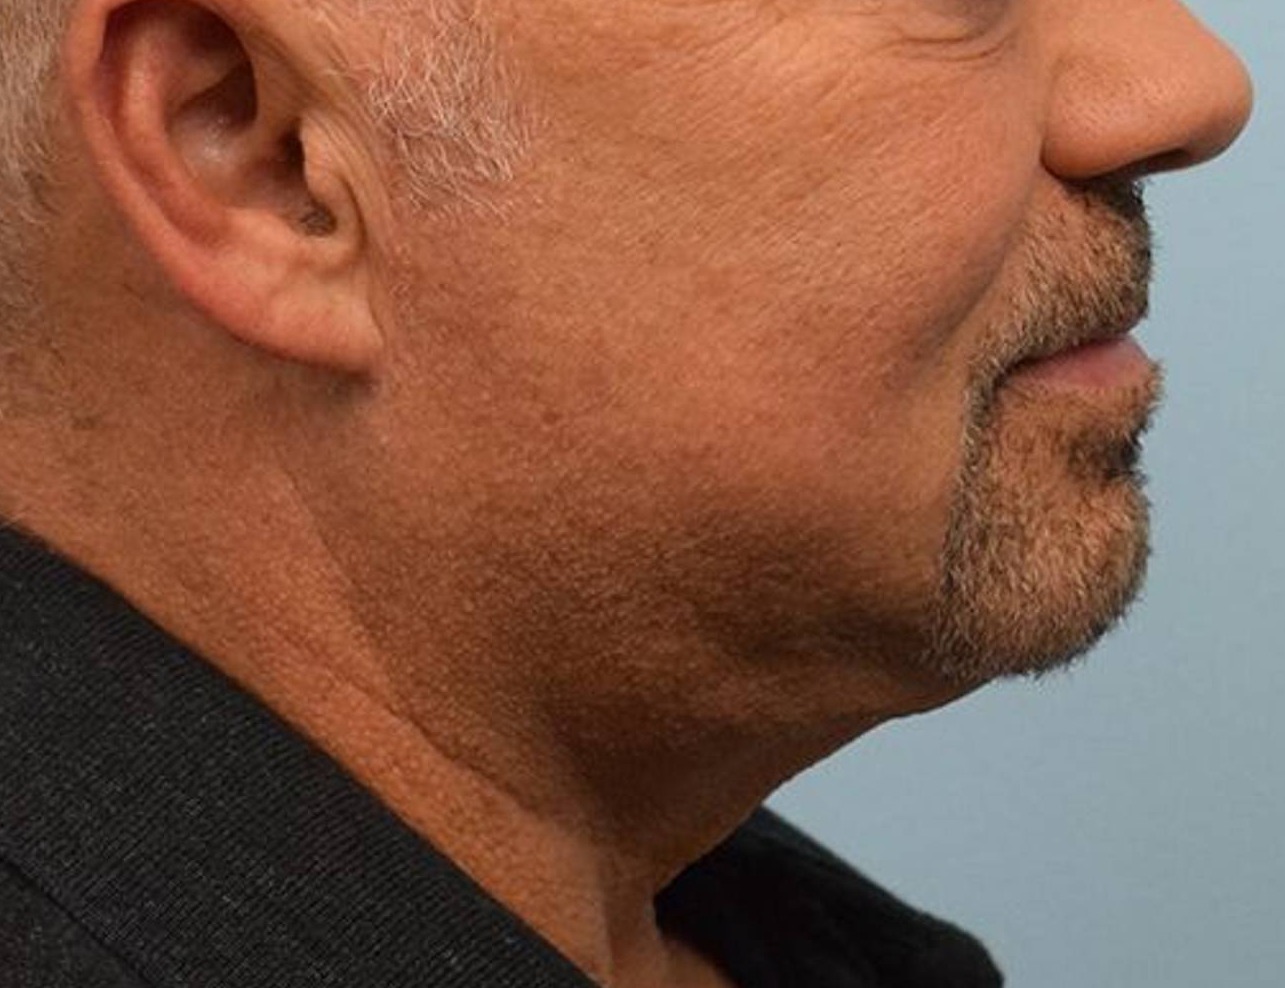 Jaw Implants Before & After Image